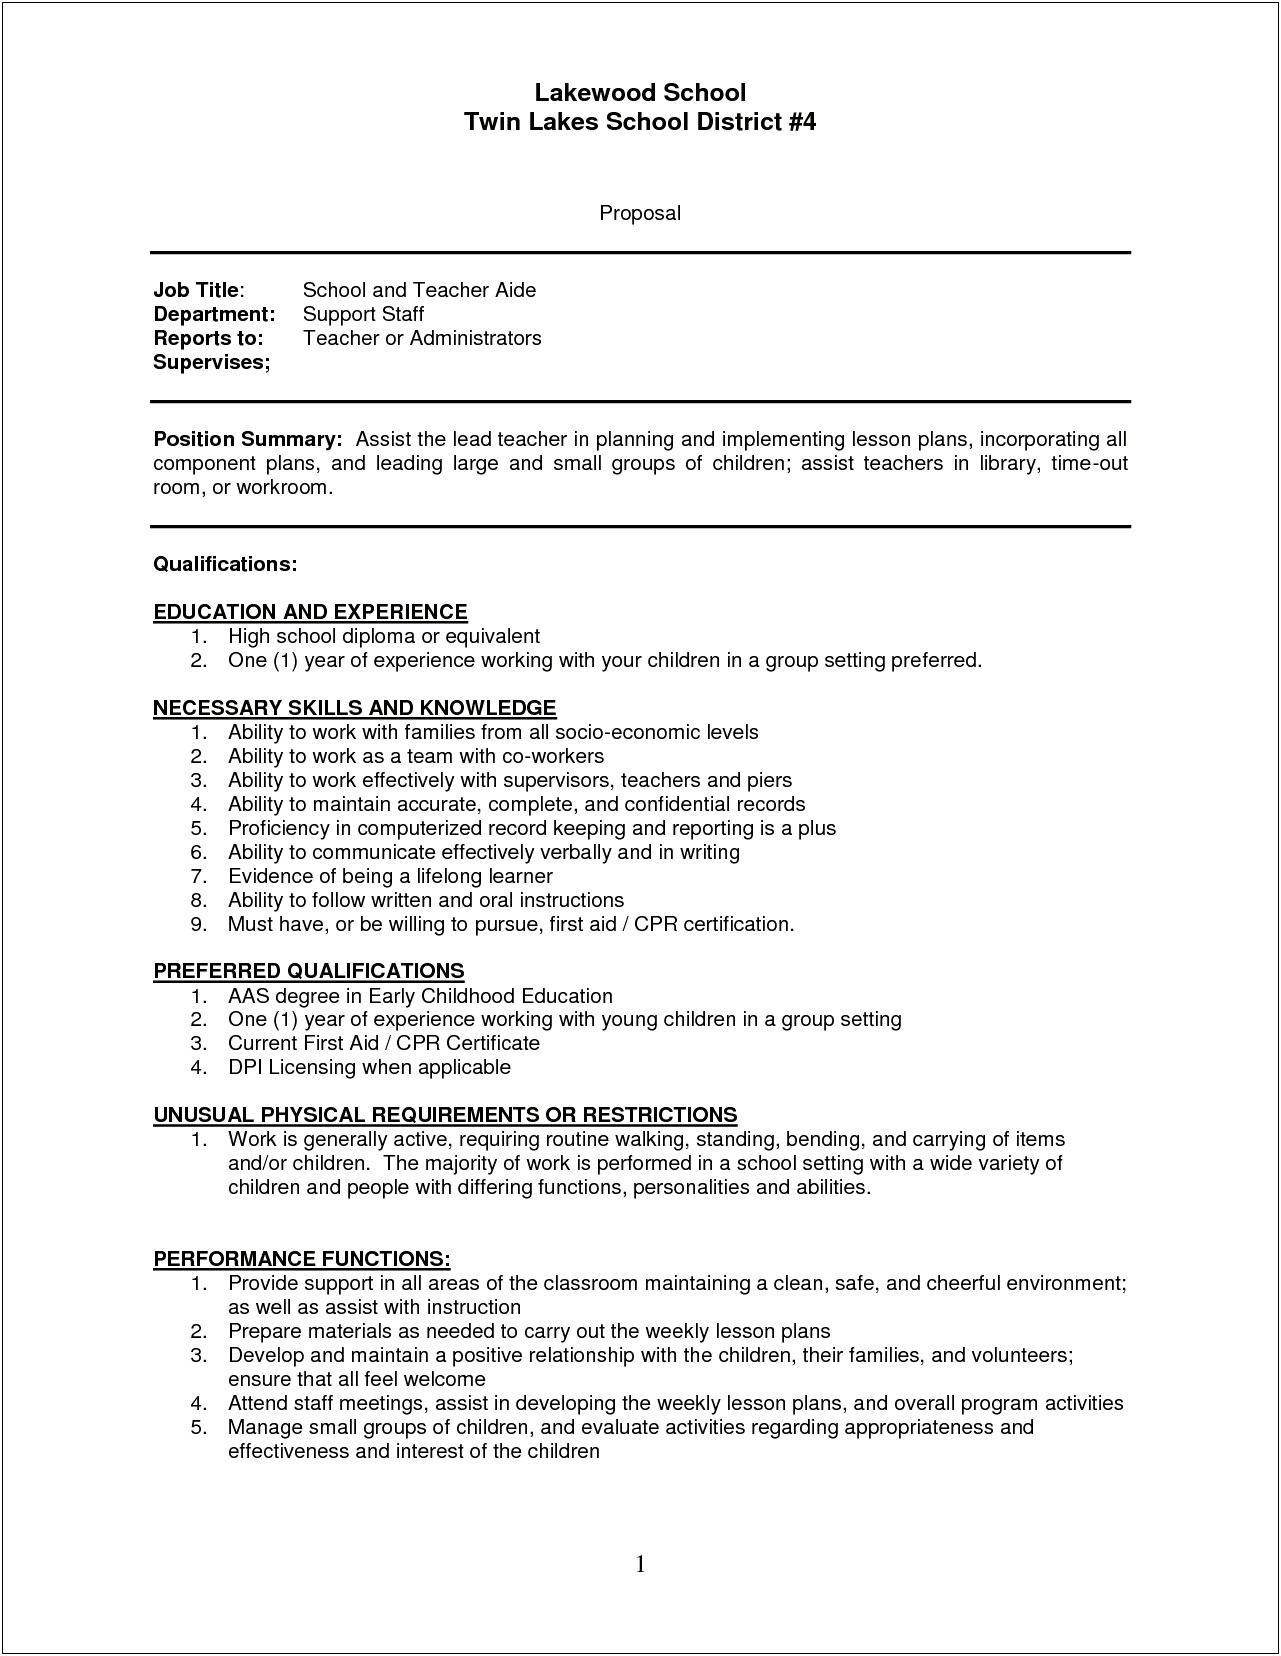 Teacher Assistant Resume With No Experience